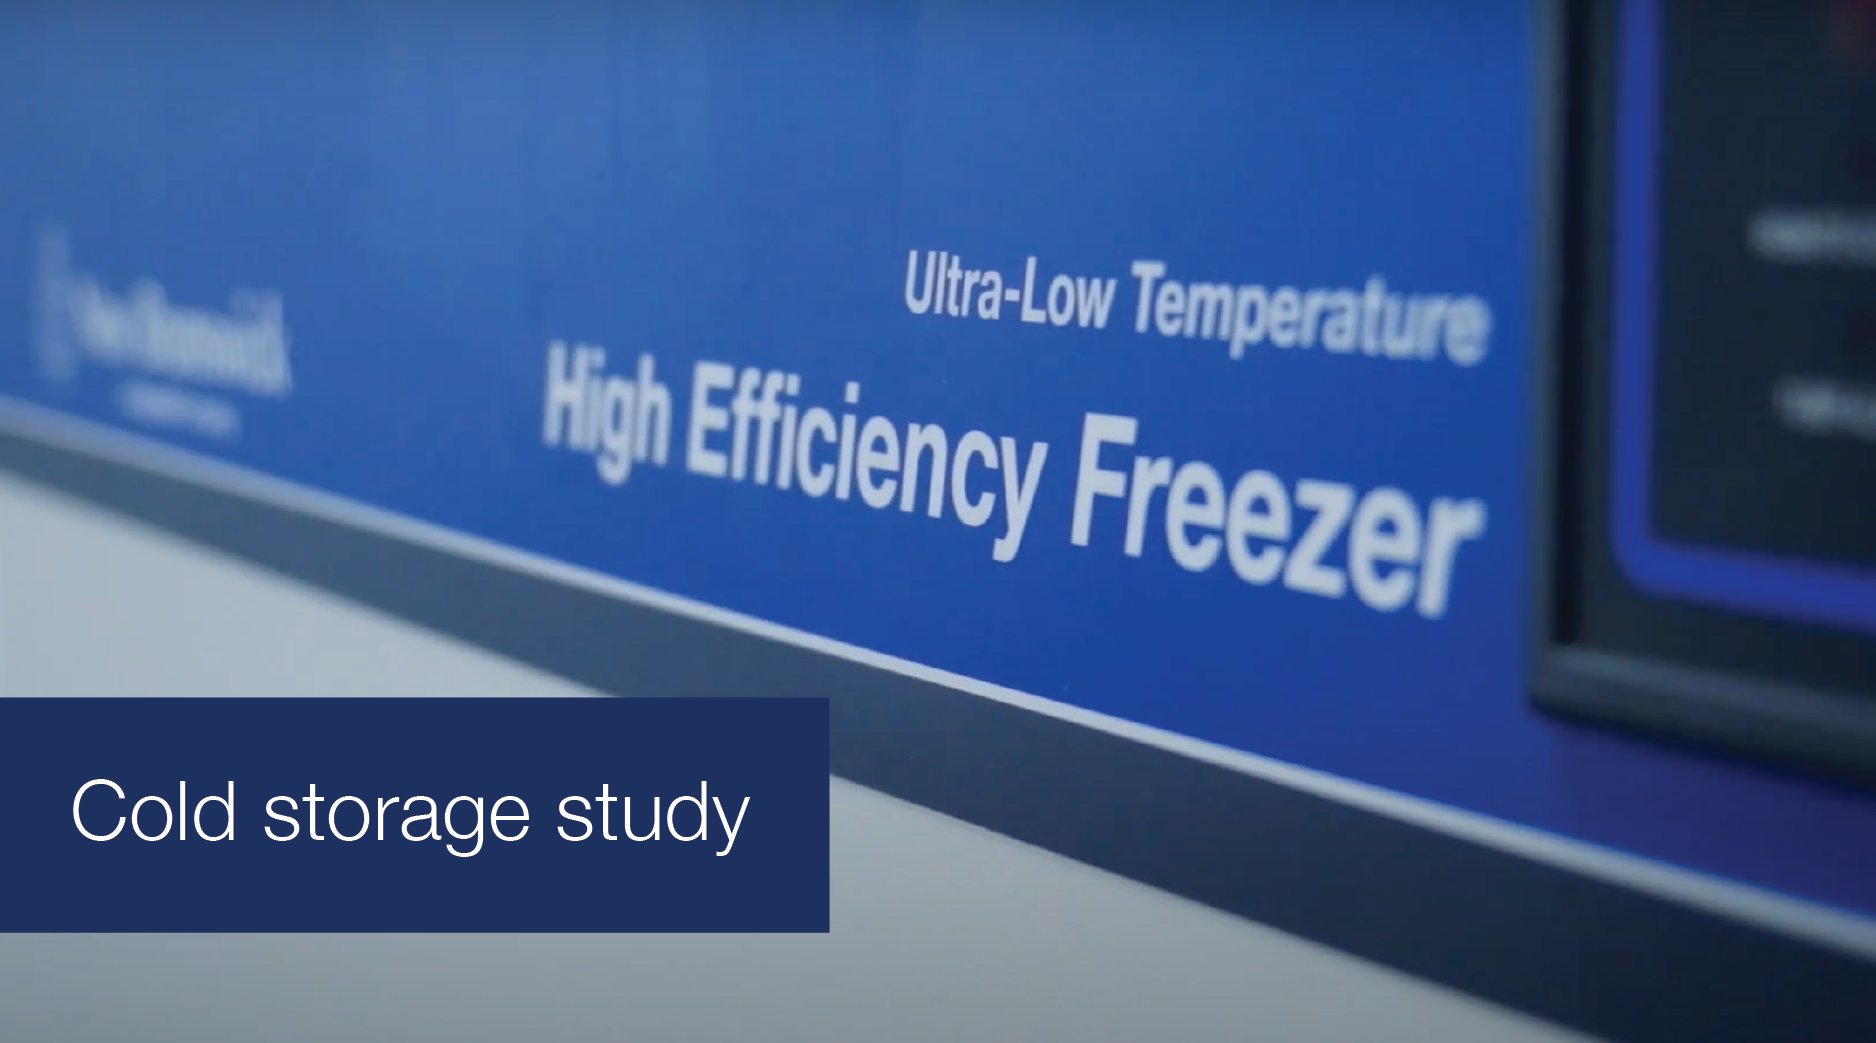 Cold storage study - Ultra Low Temperature High Efficiency Freezer label close up